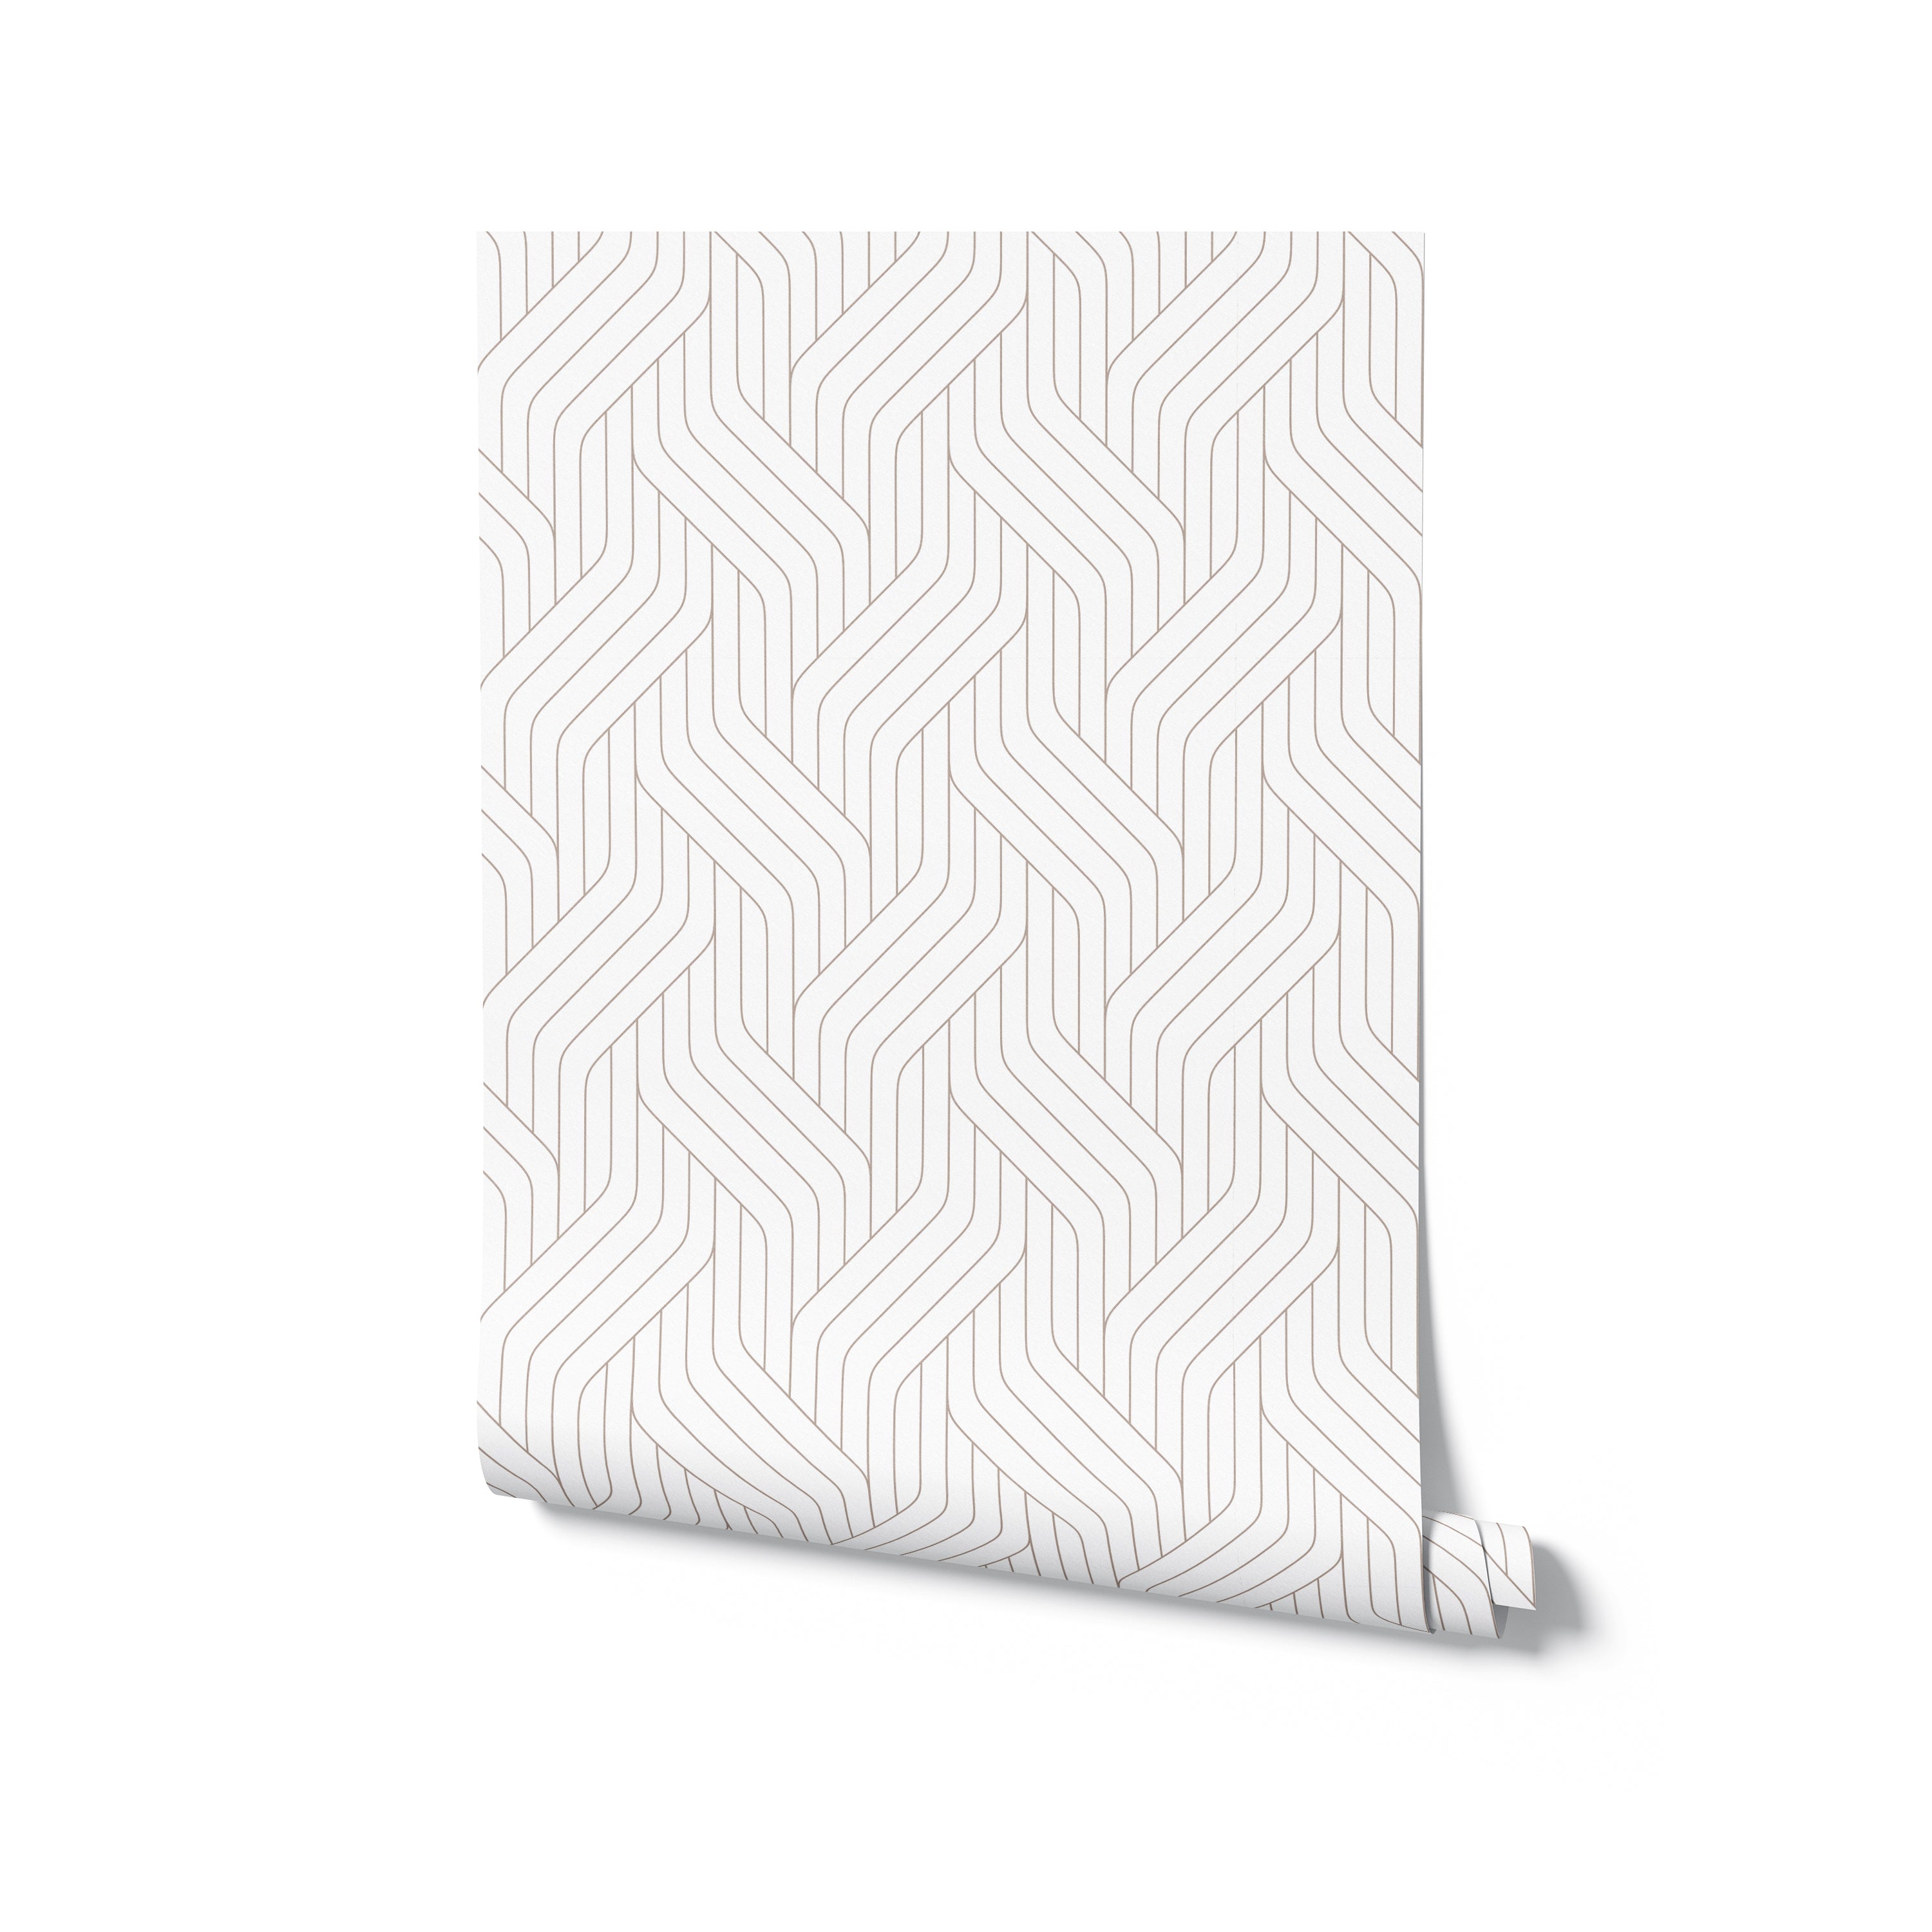 Roll of Modern Braids Wallpaper showing the full pattern design with beige geometric braids on a white background